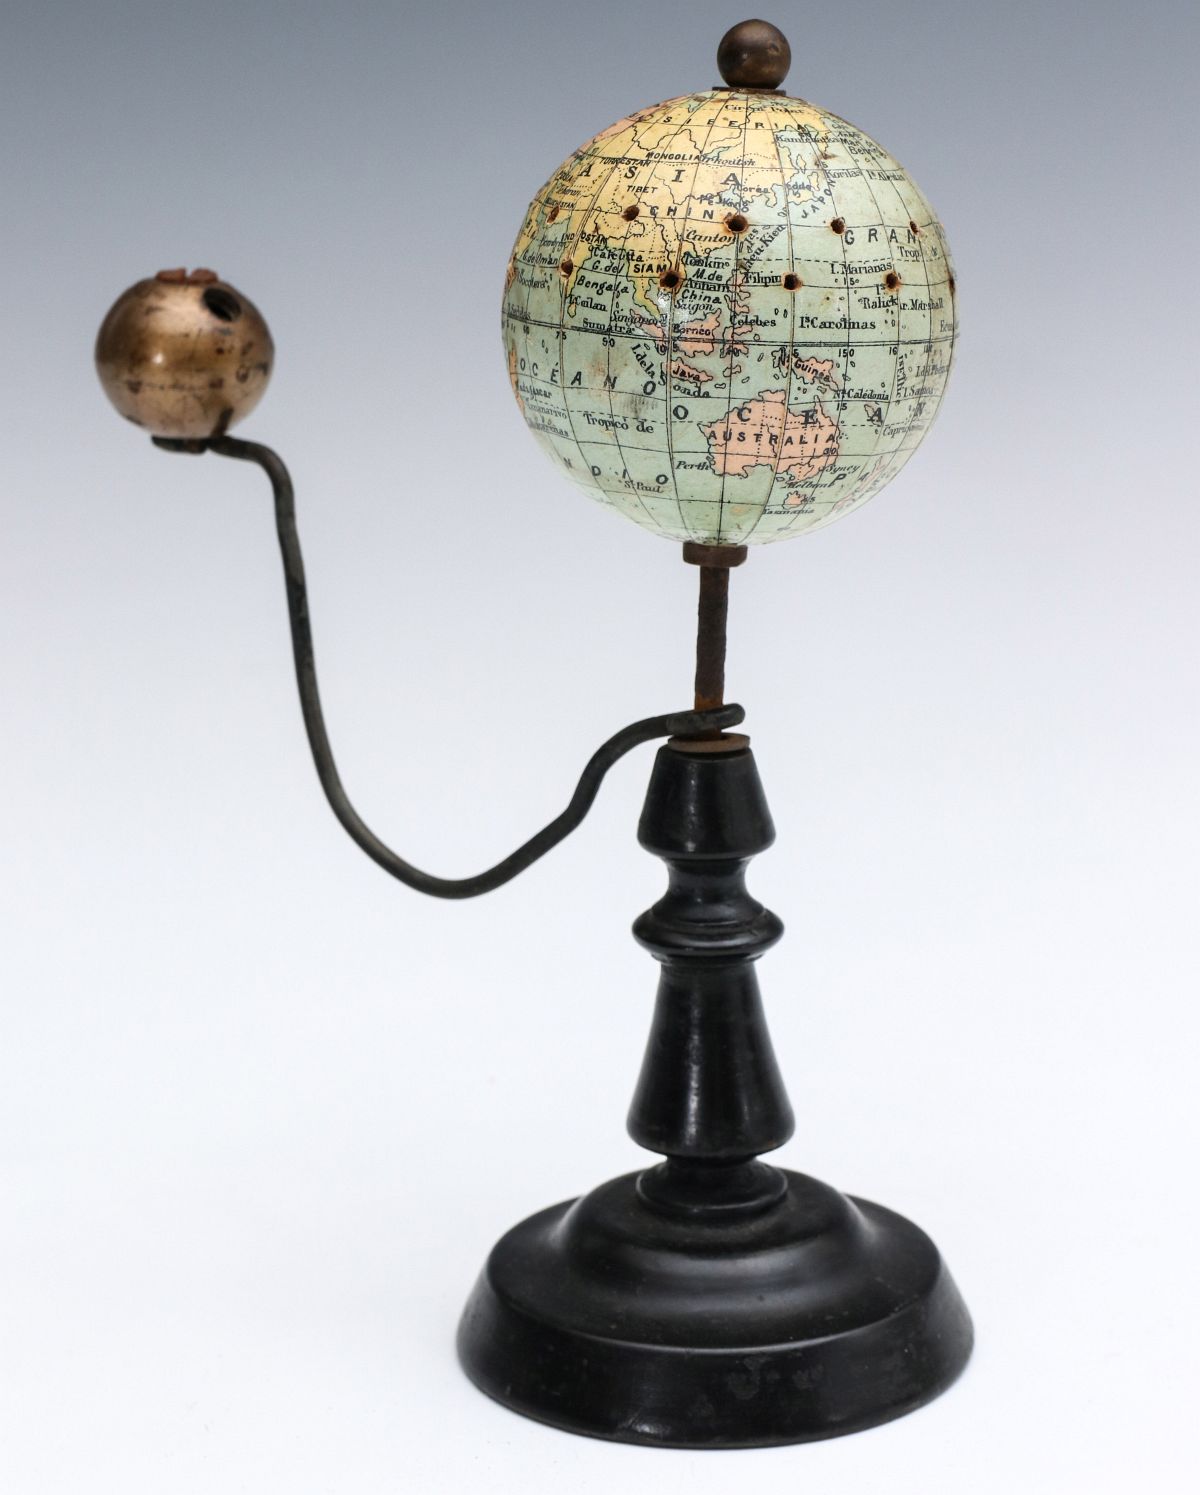 A LATE 19TH CENTURY FRENCH GLOBE, J. FOREST PARIS